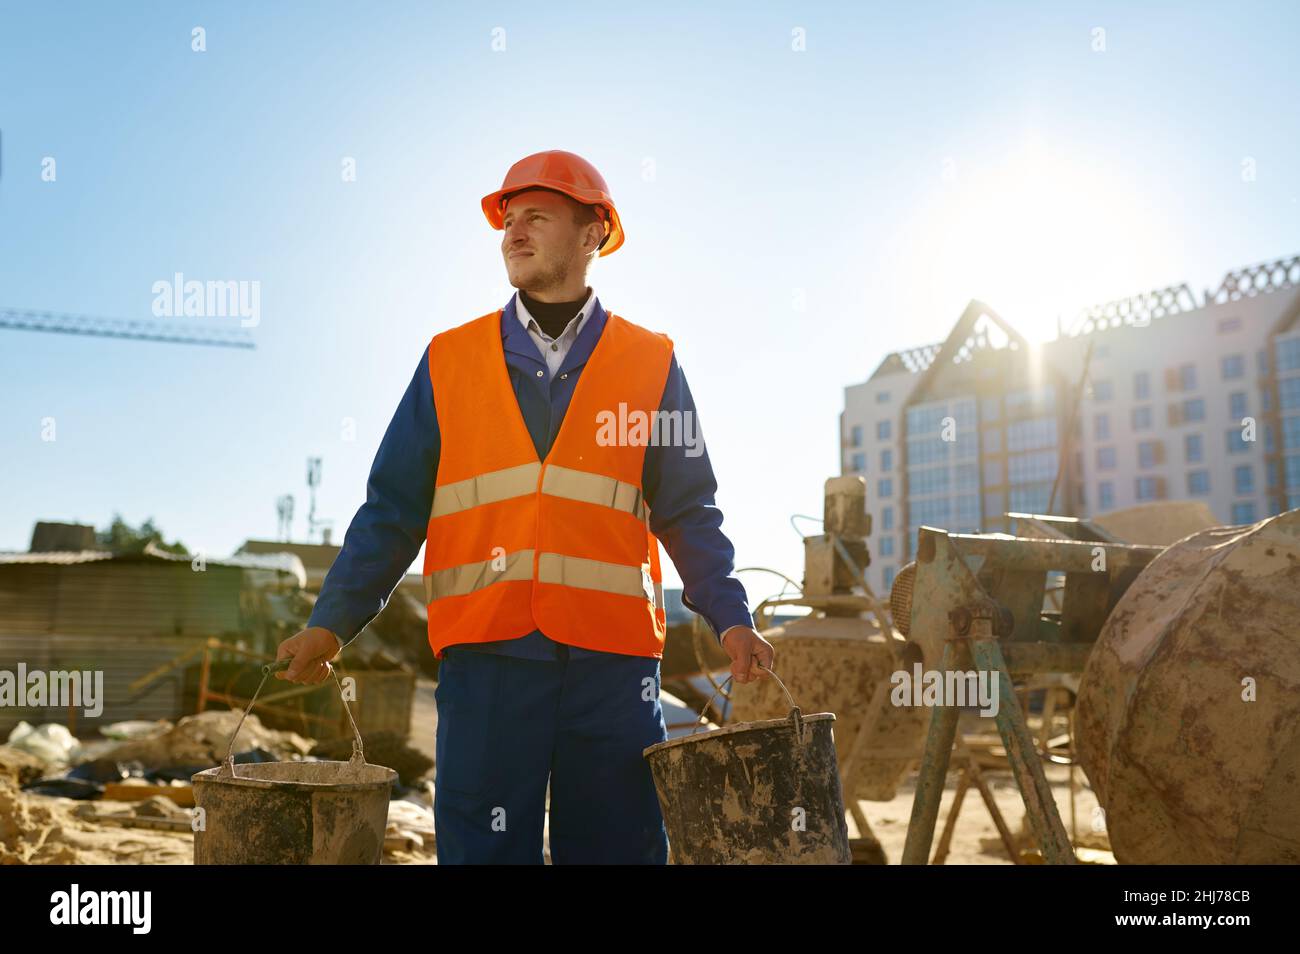 Builder holding bucket over construction site background Stock Photo